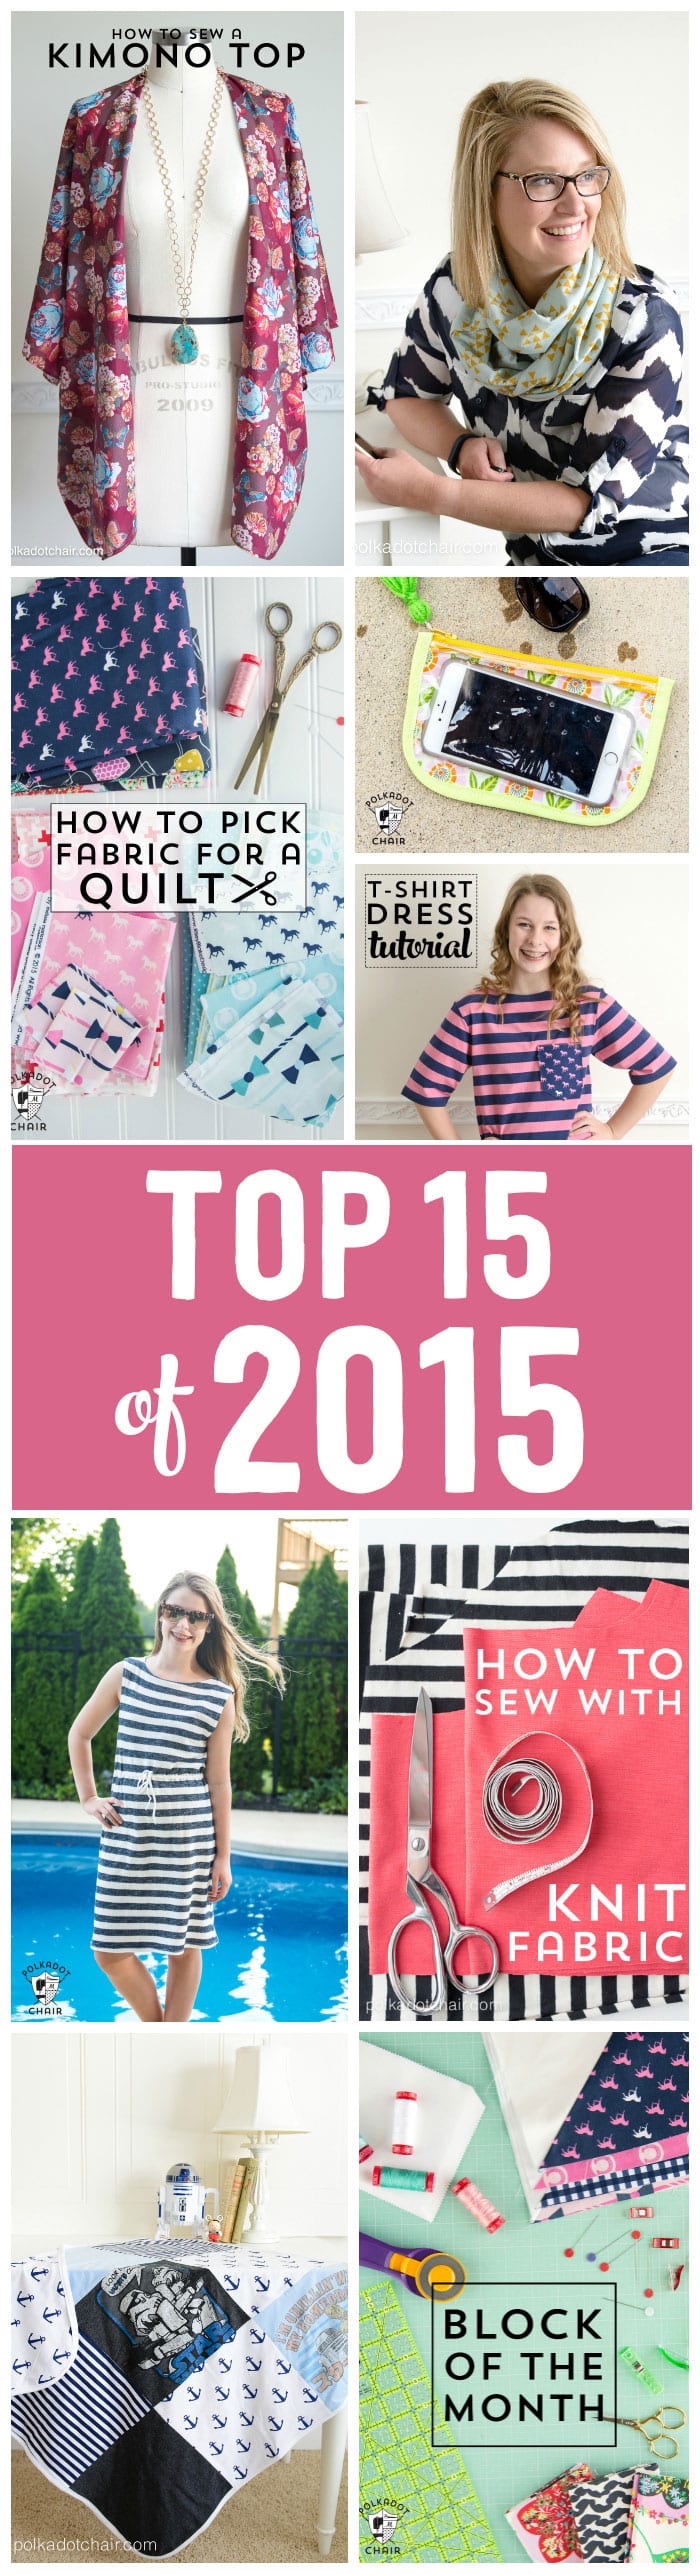 The top 15 best sewing patterns and tutorials of 2015 (they are free!)